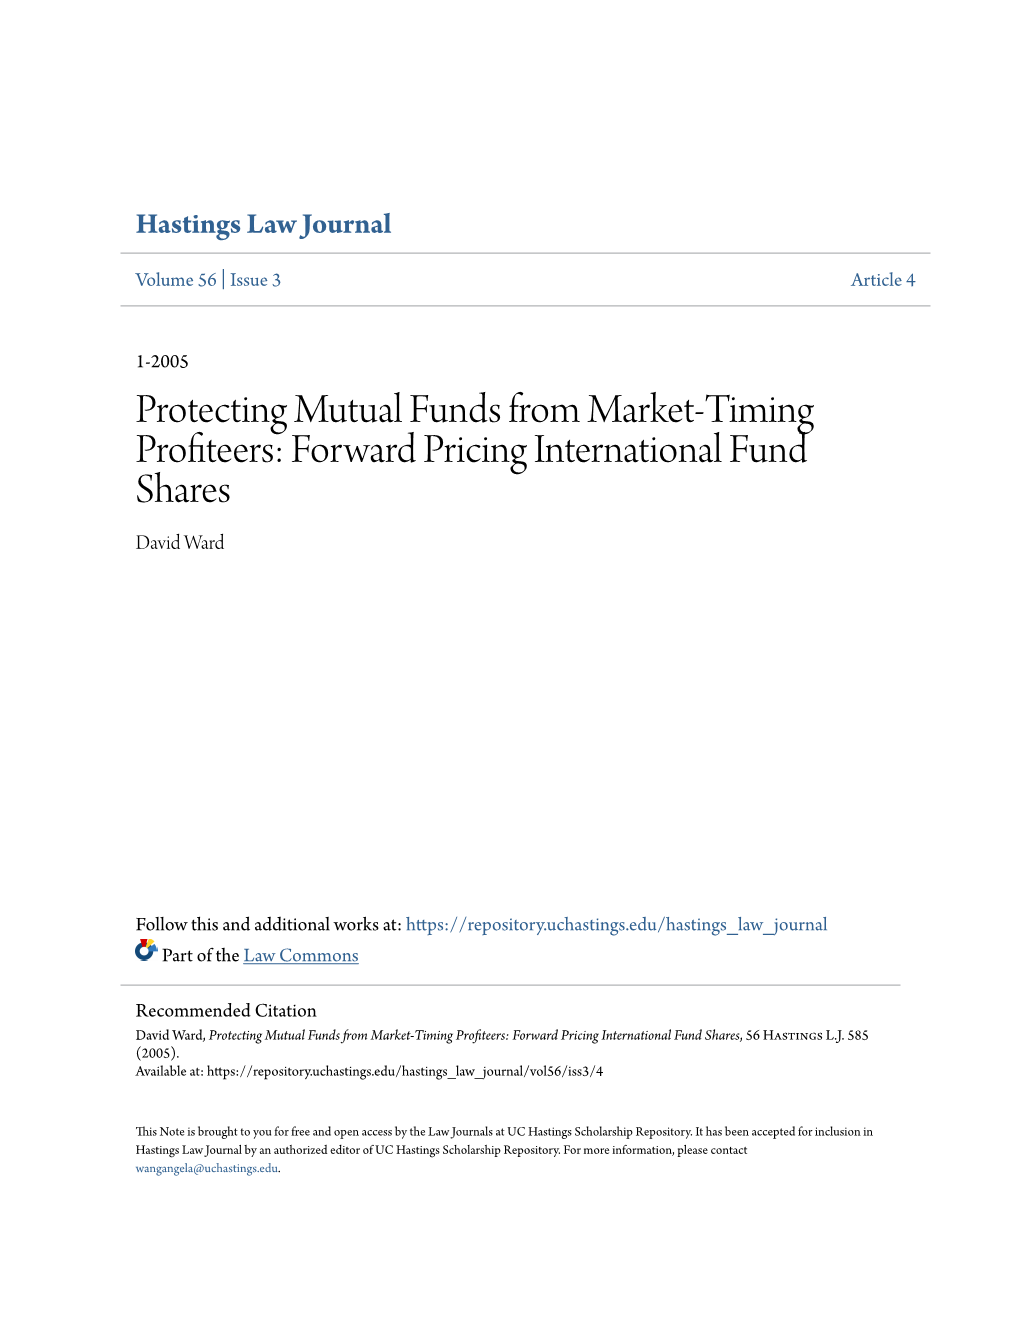 Protecting Mutual Funds from Market-Timing Profiteers: Forward Pricing International Fund Shares David Ward